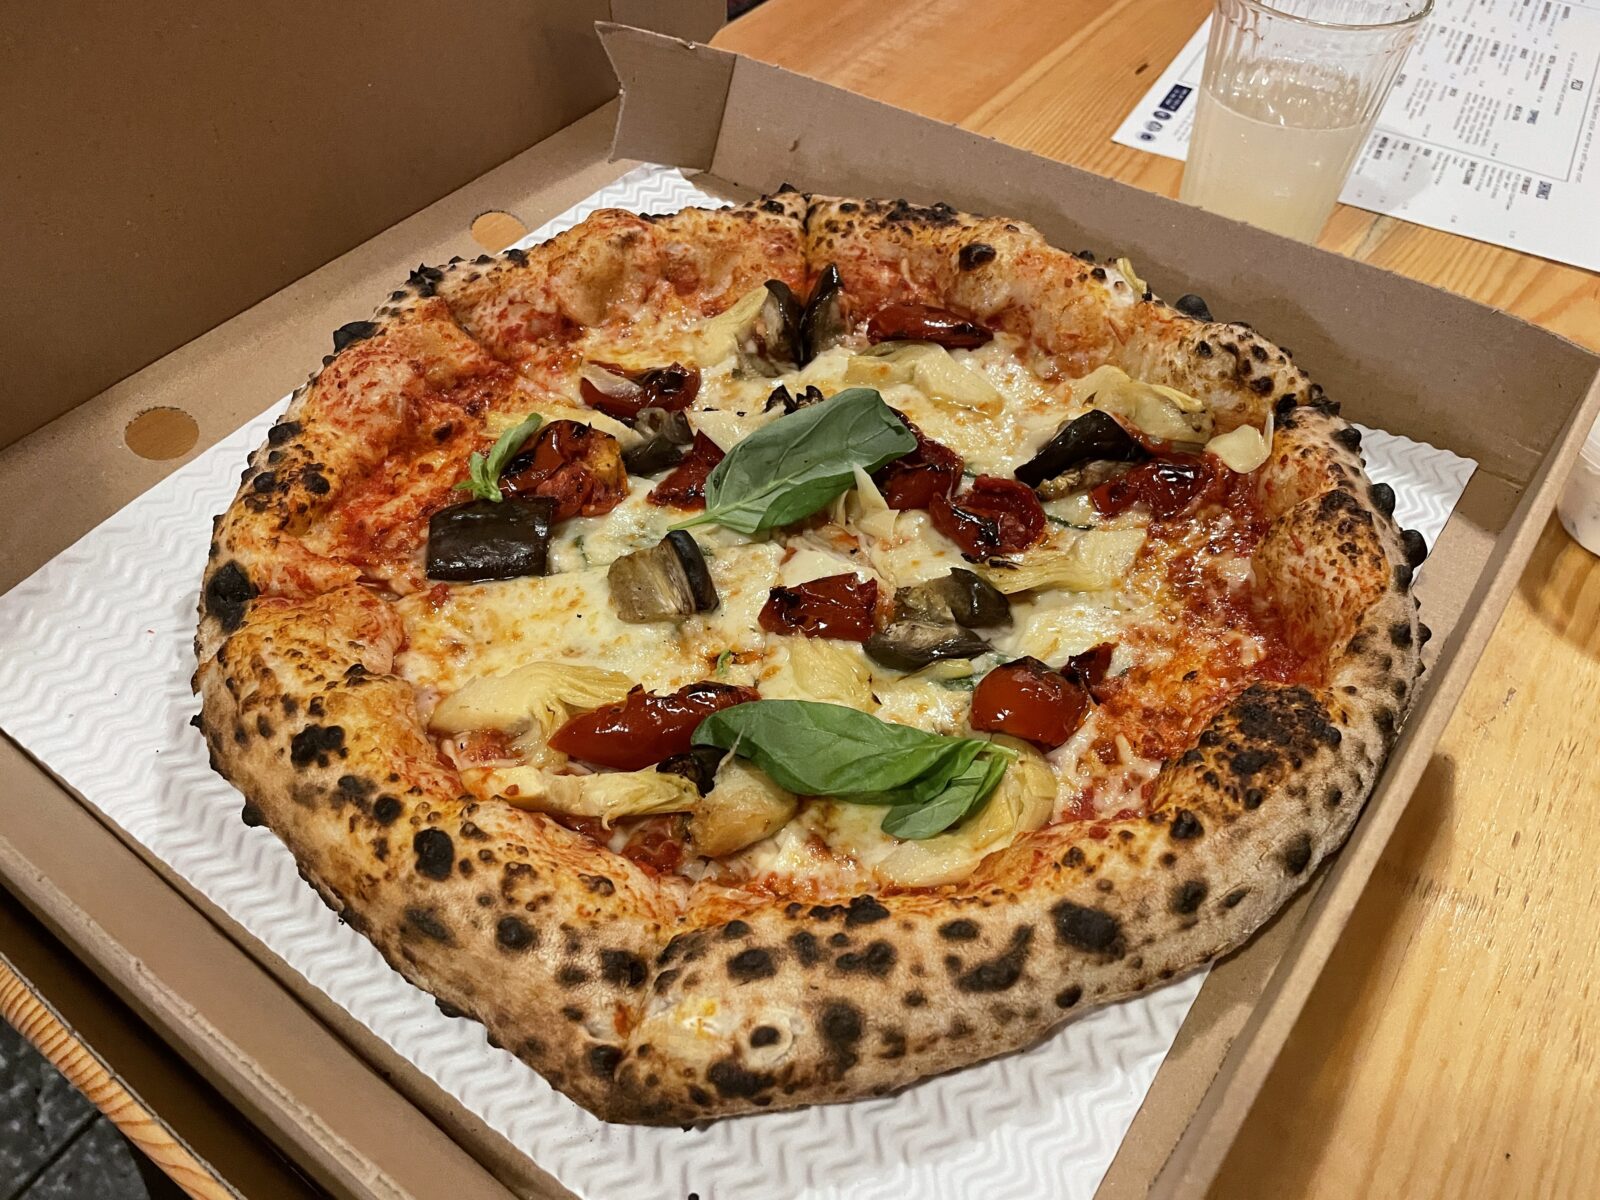 where is the best pizza place in manchester?